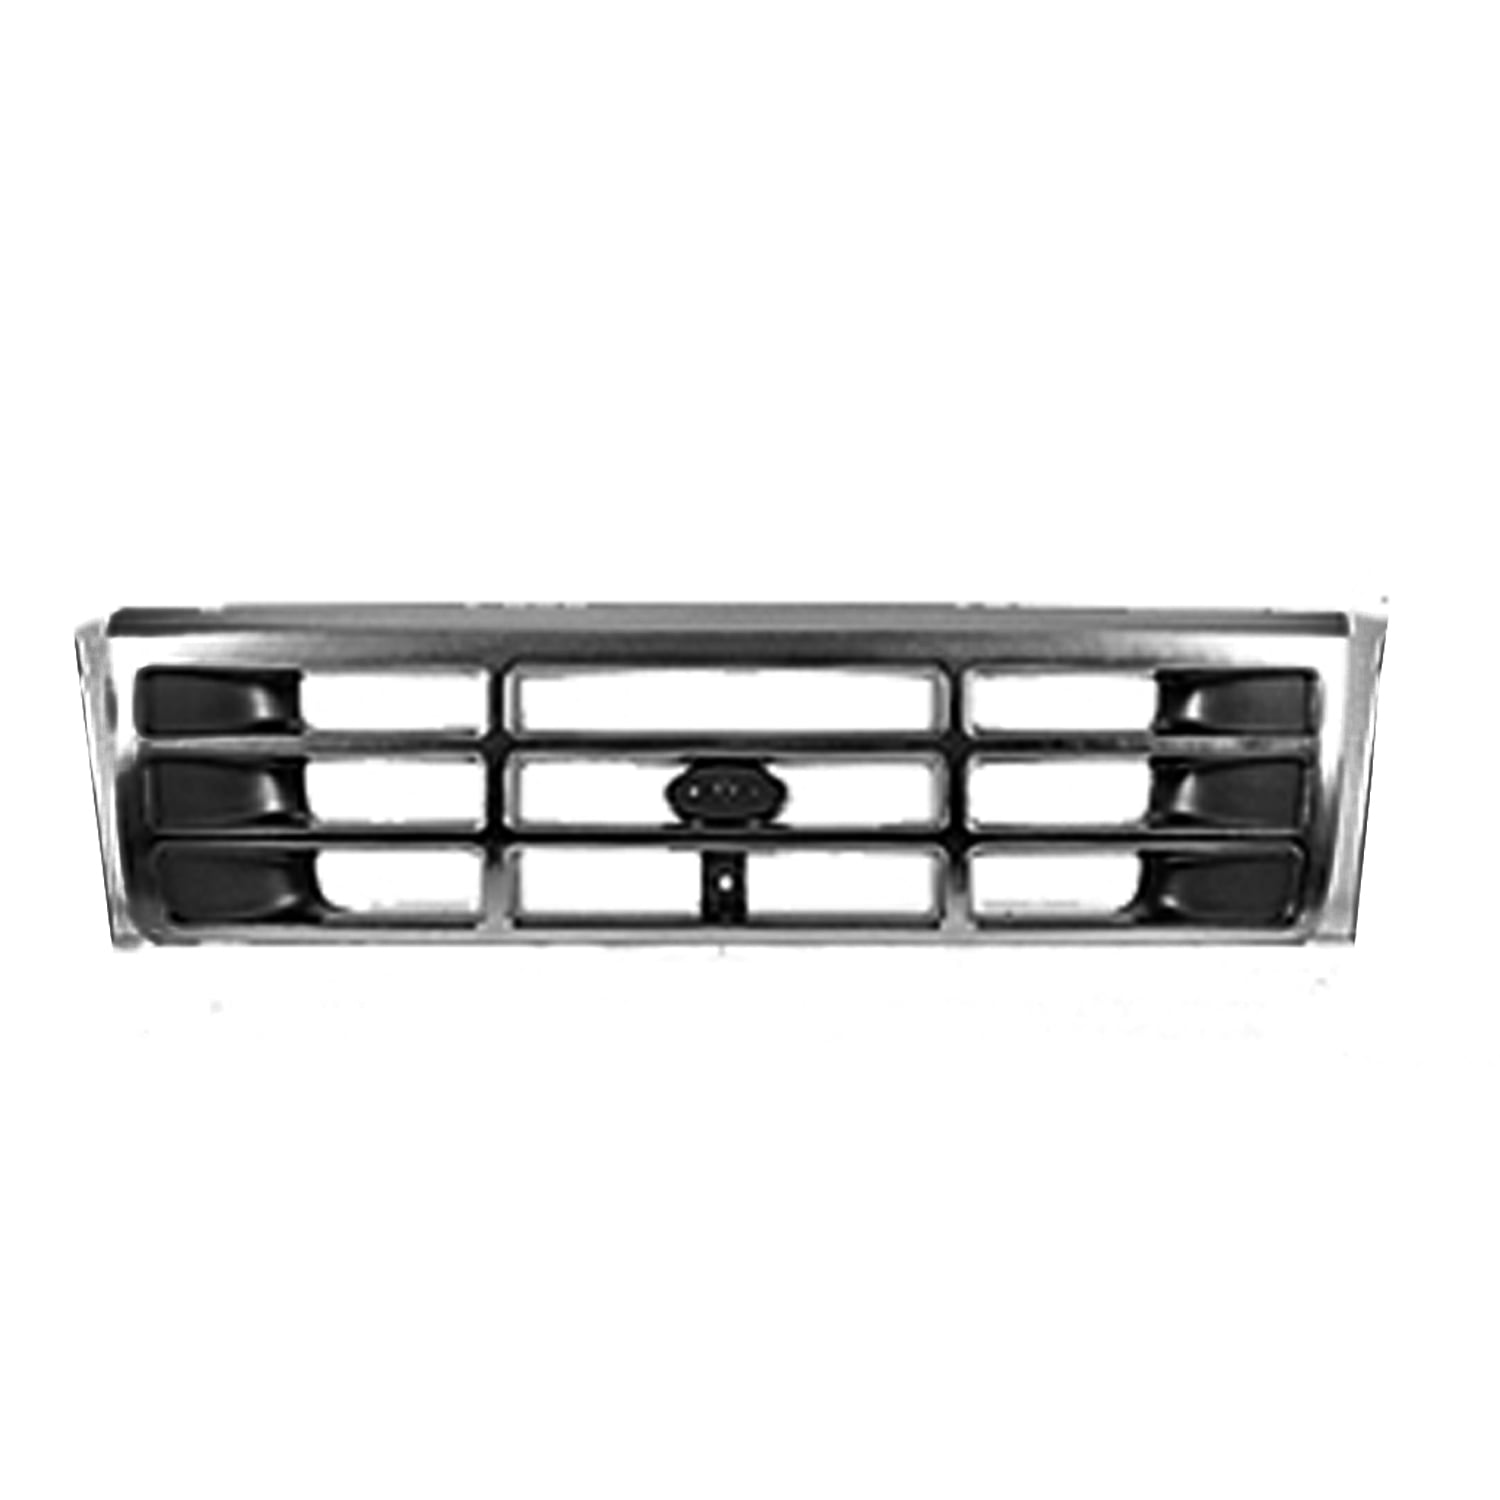 New Replacement Grille Center Fits 1992-1996 Ford Bronco OEM Quality 